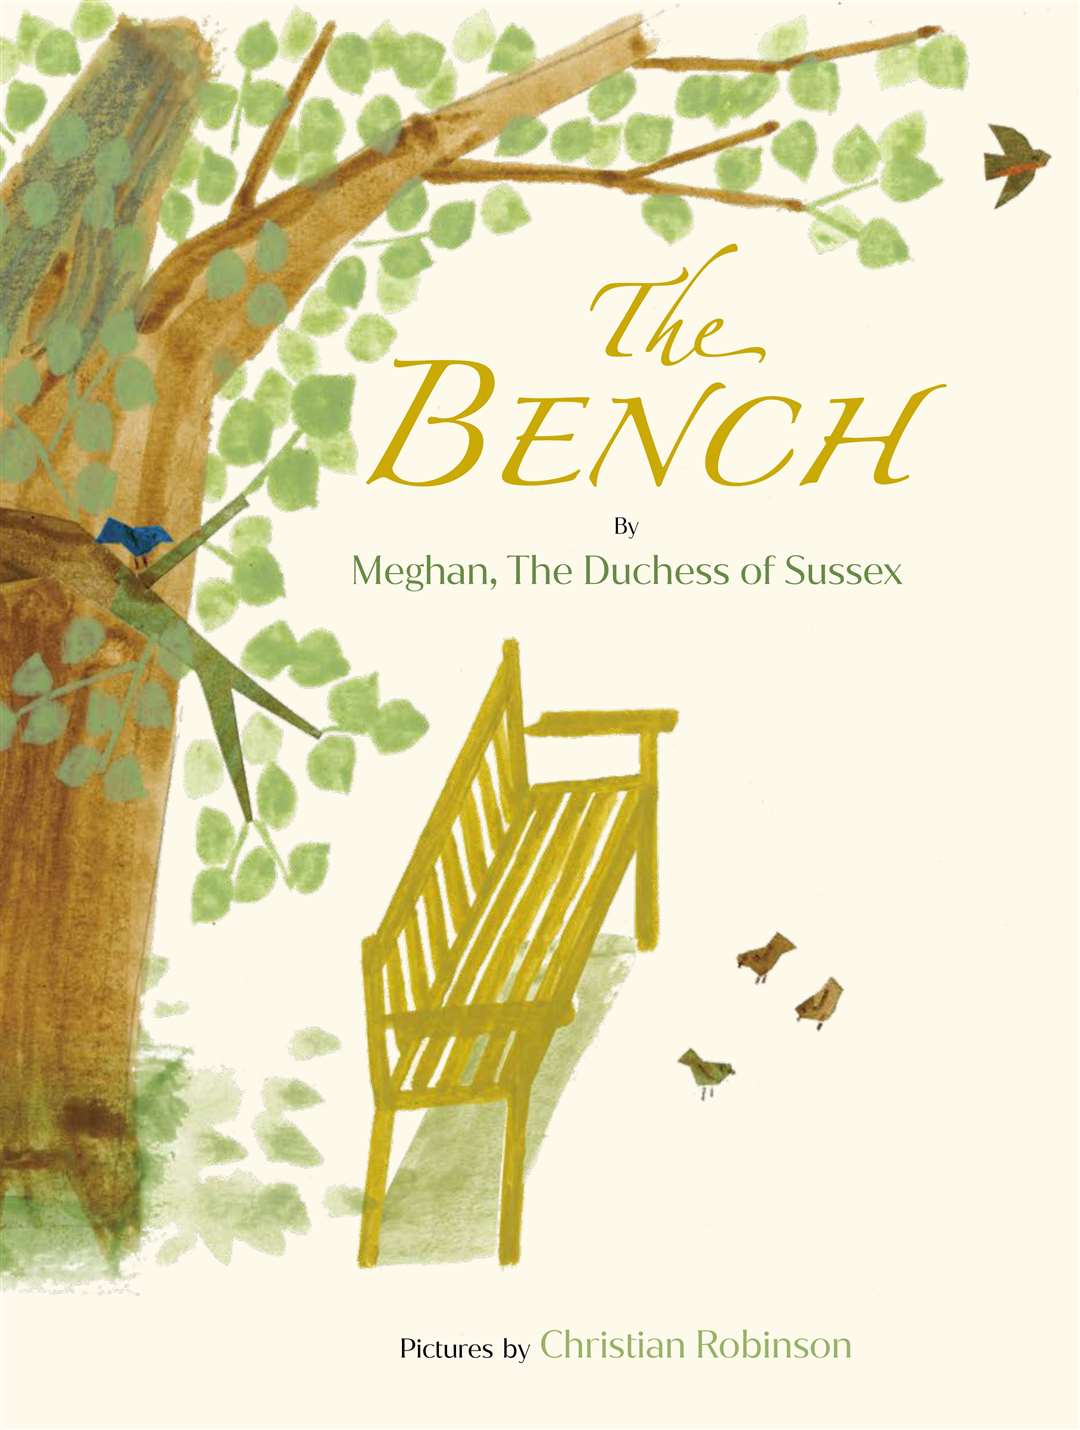 The cover of The Bench, the debut children’s book written by the Duchess of Sussex, with illustrations by artist Christian Robinson (Penguin Random House/PA)